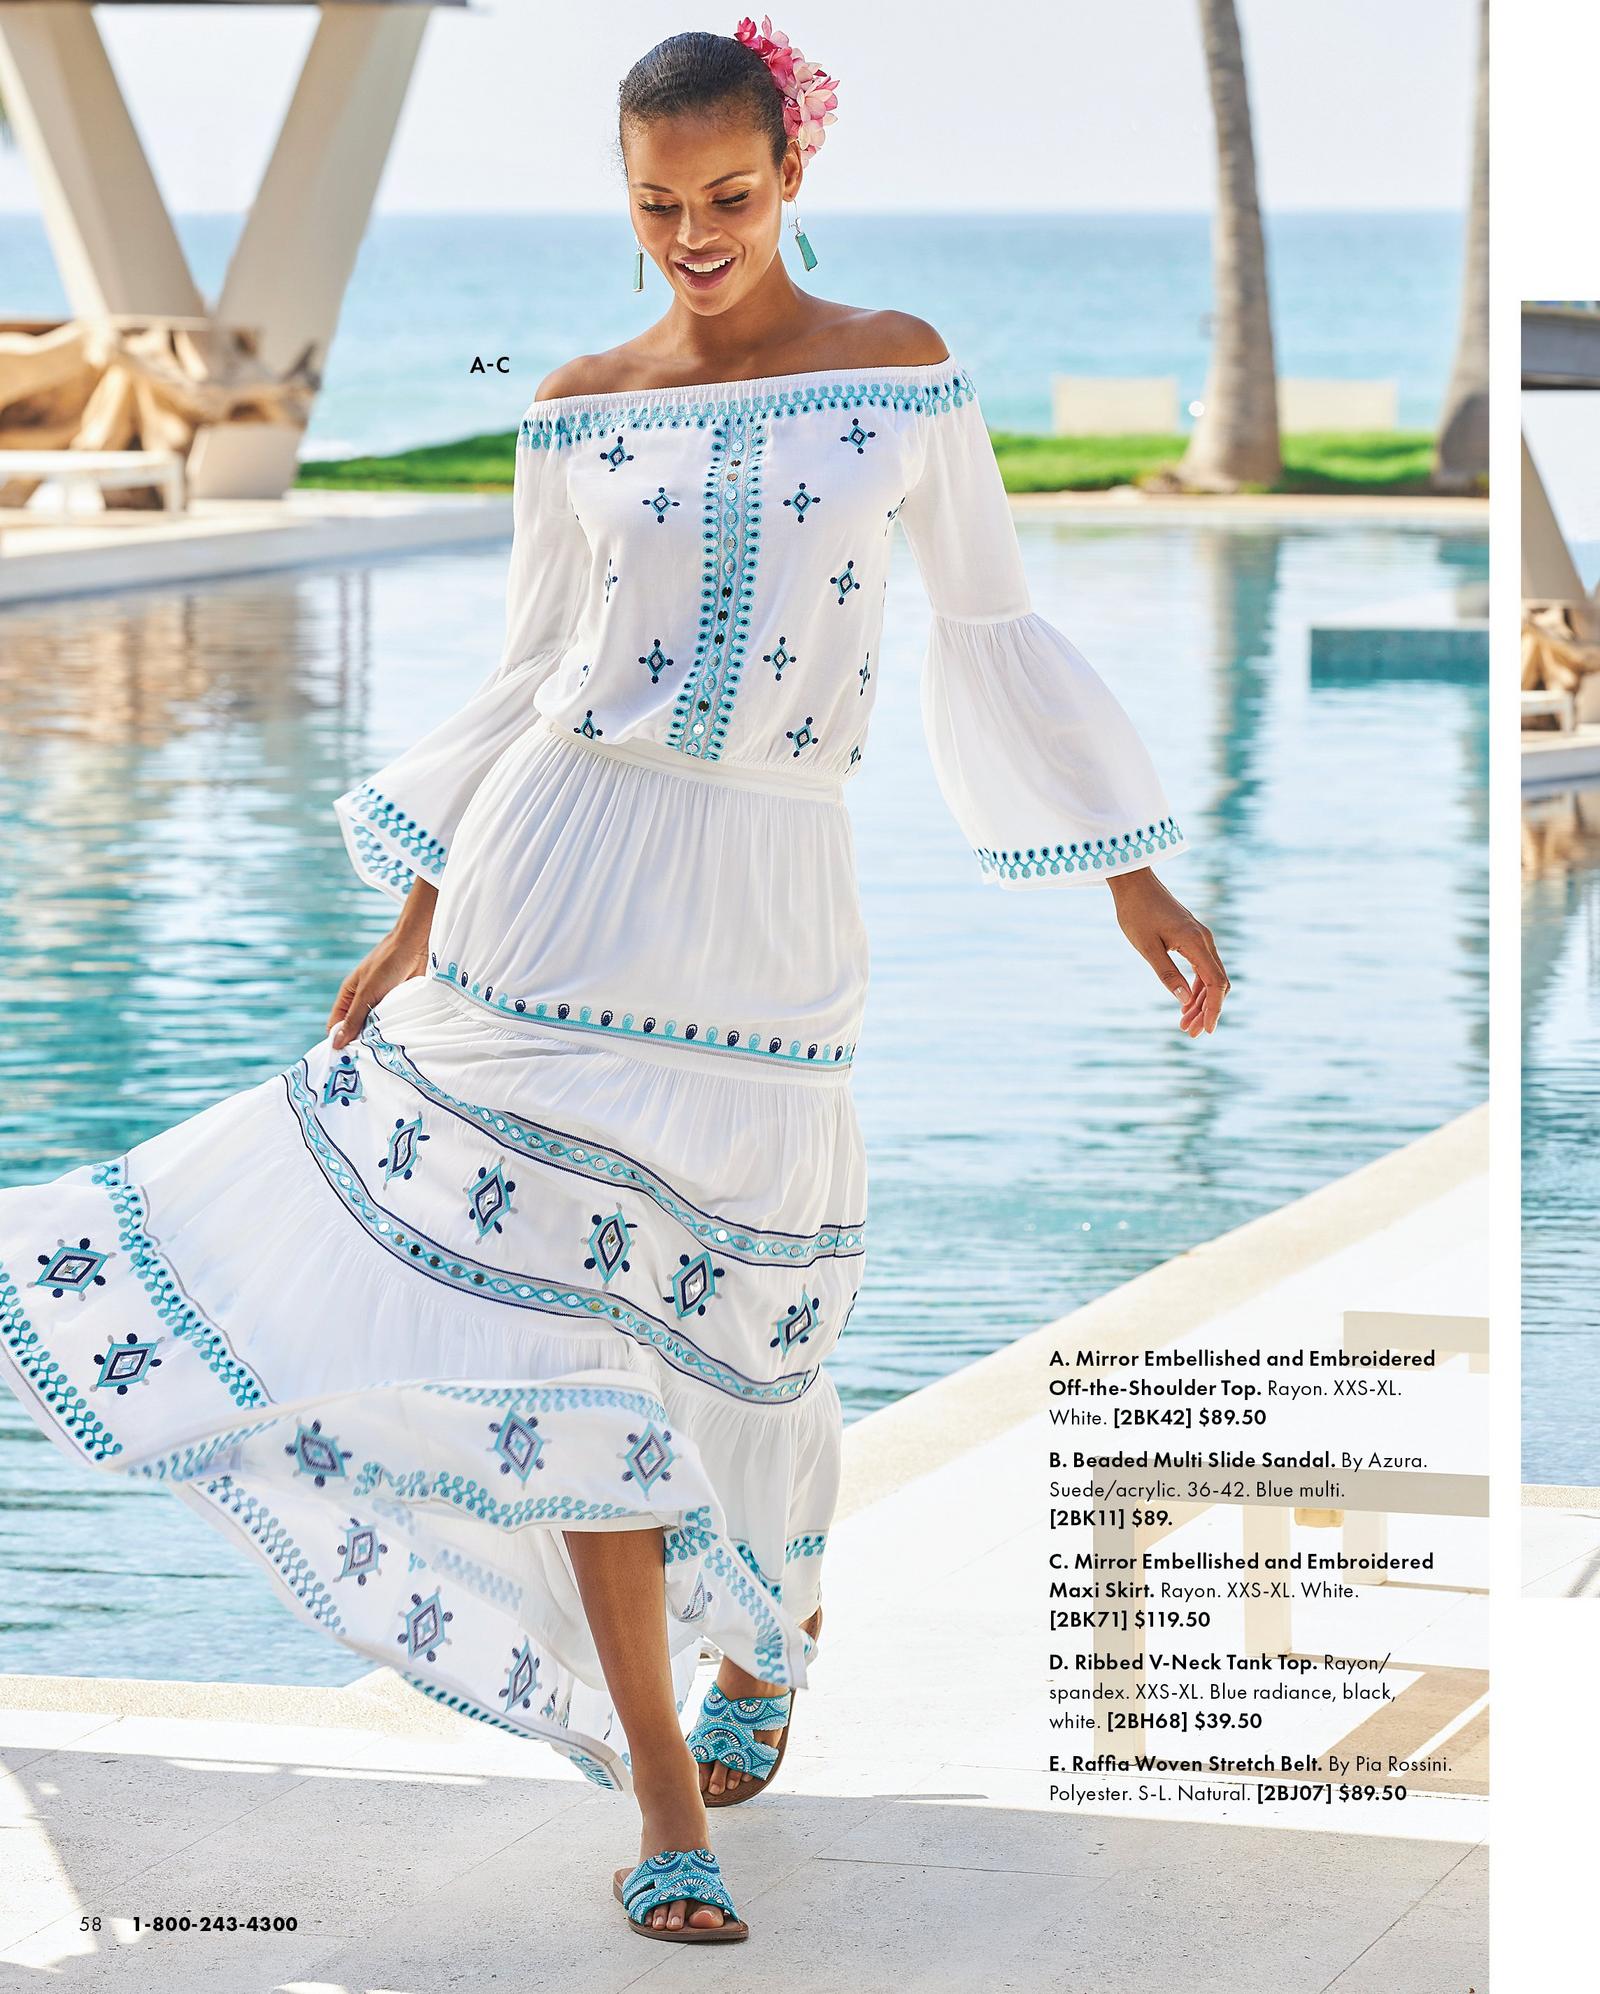 model wearing a blue and white mirror embellished off-the-shoulder flare sleeve top, matching maxi skirt, and blue beaded sandals.